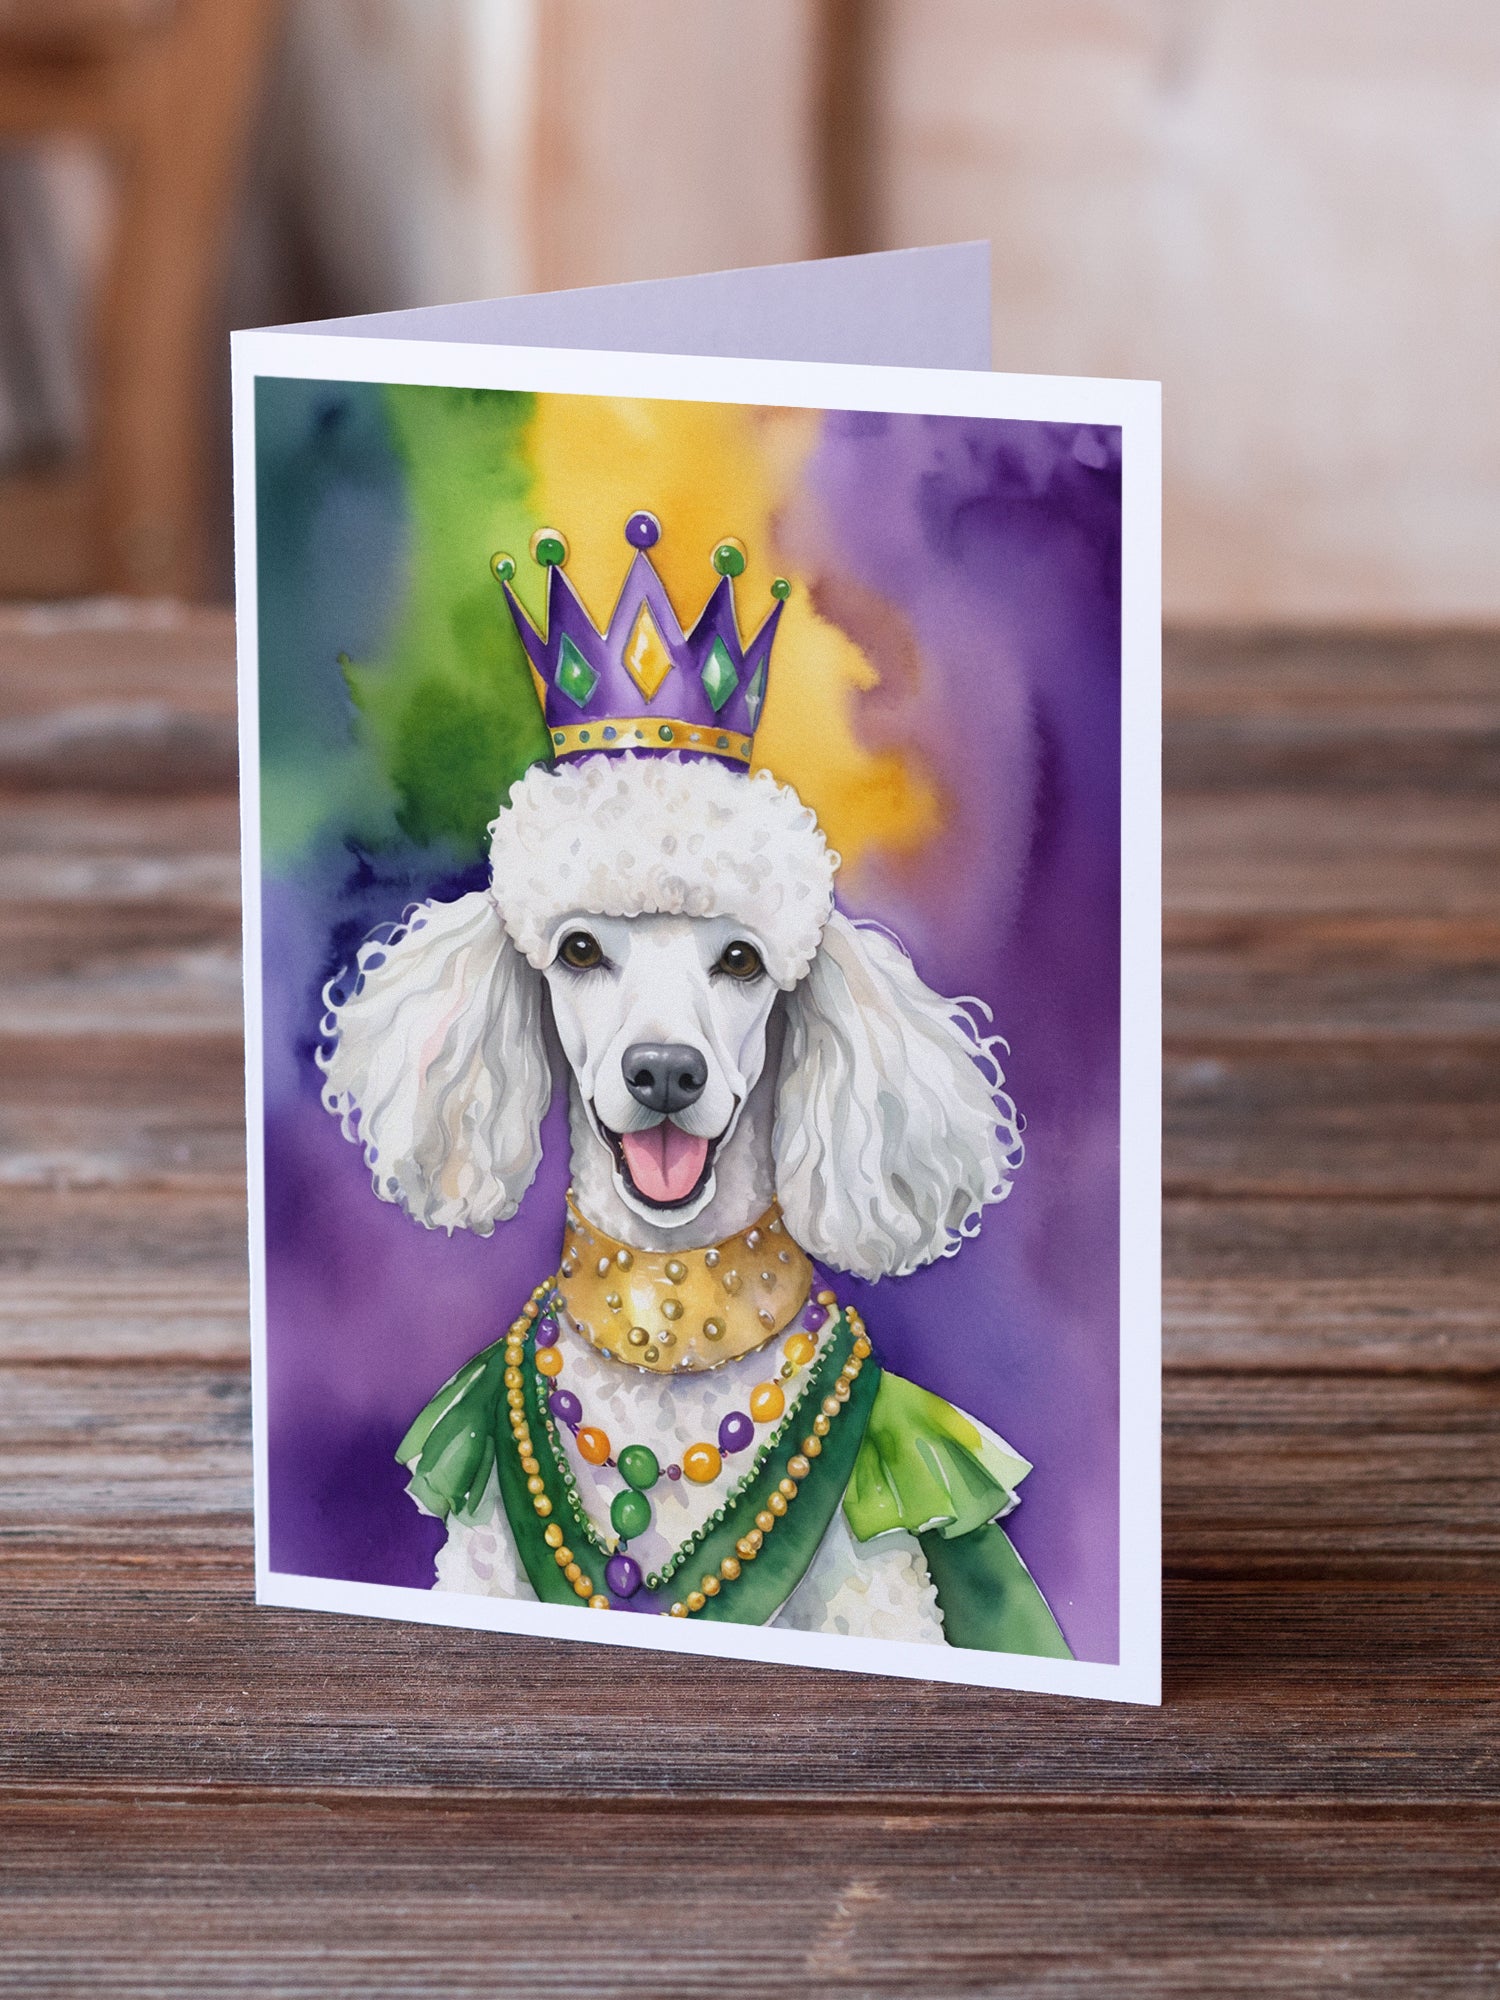 Buy this White Poodle King of Mardi Gras Greeting Cards Pack of 8